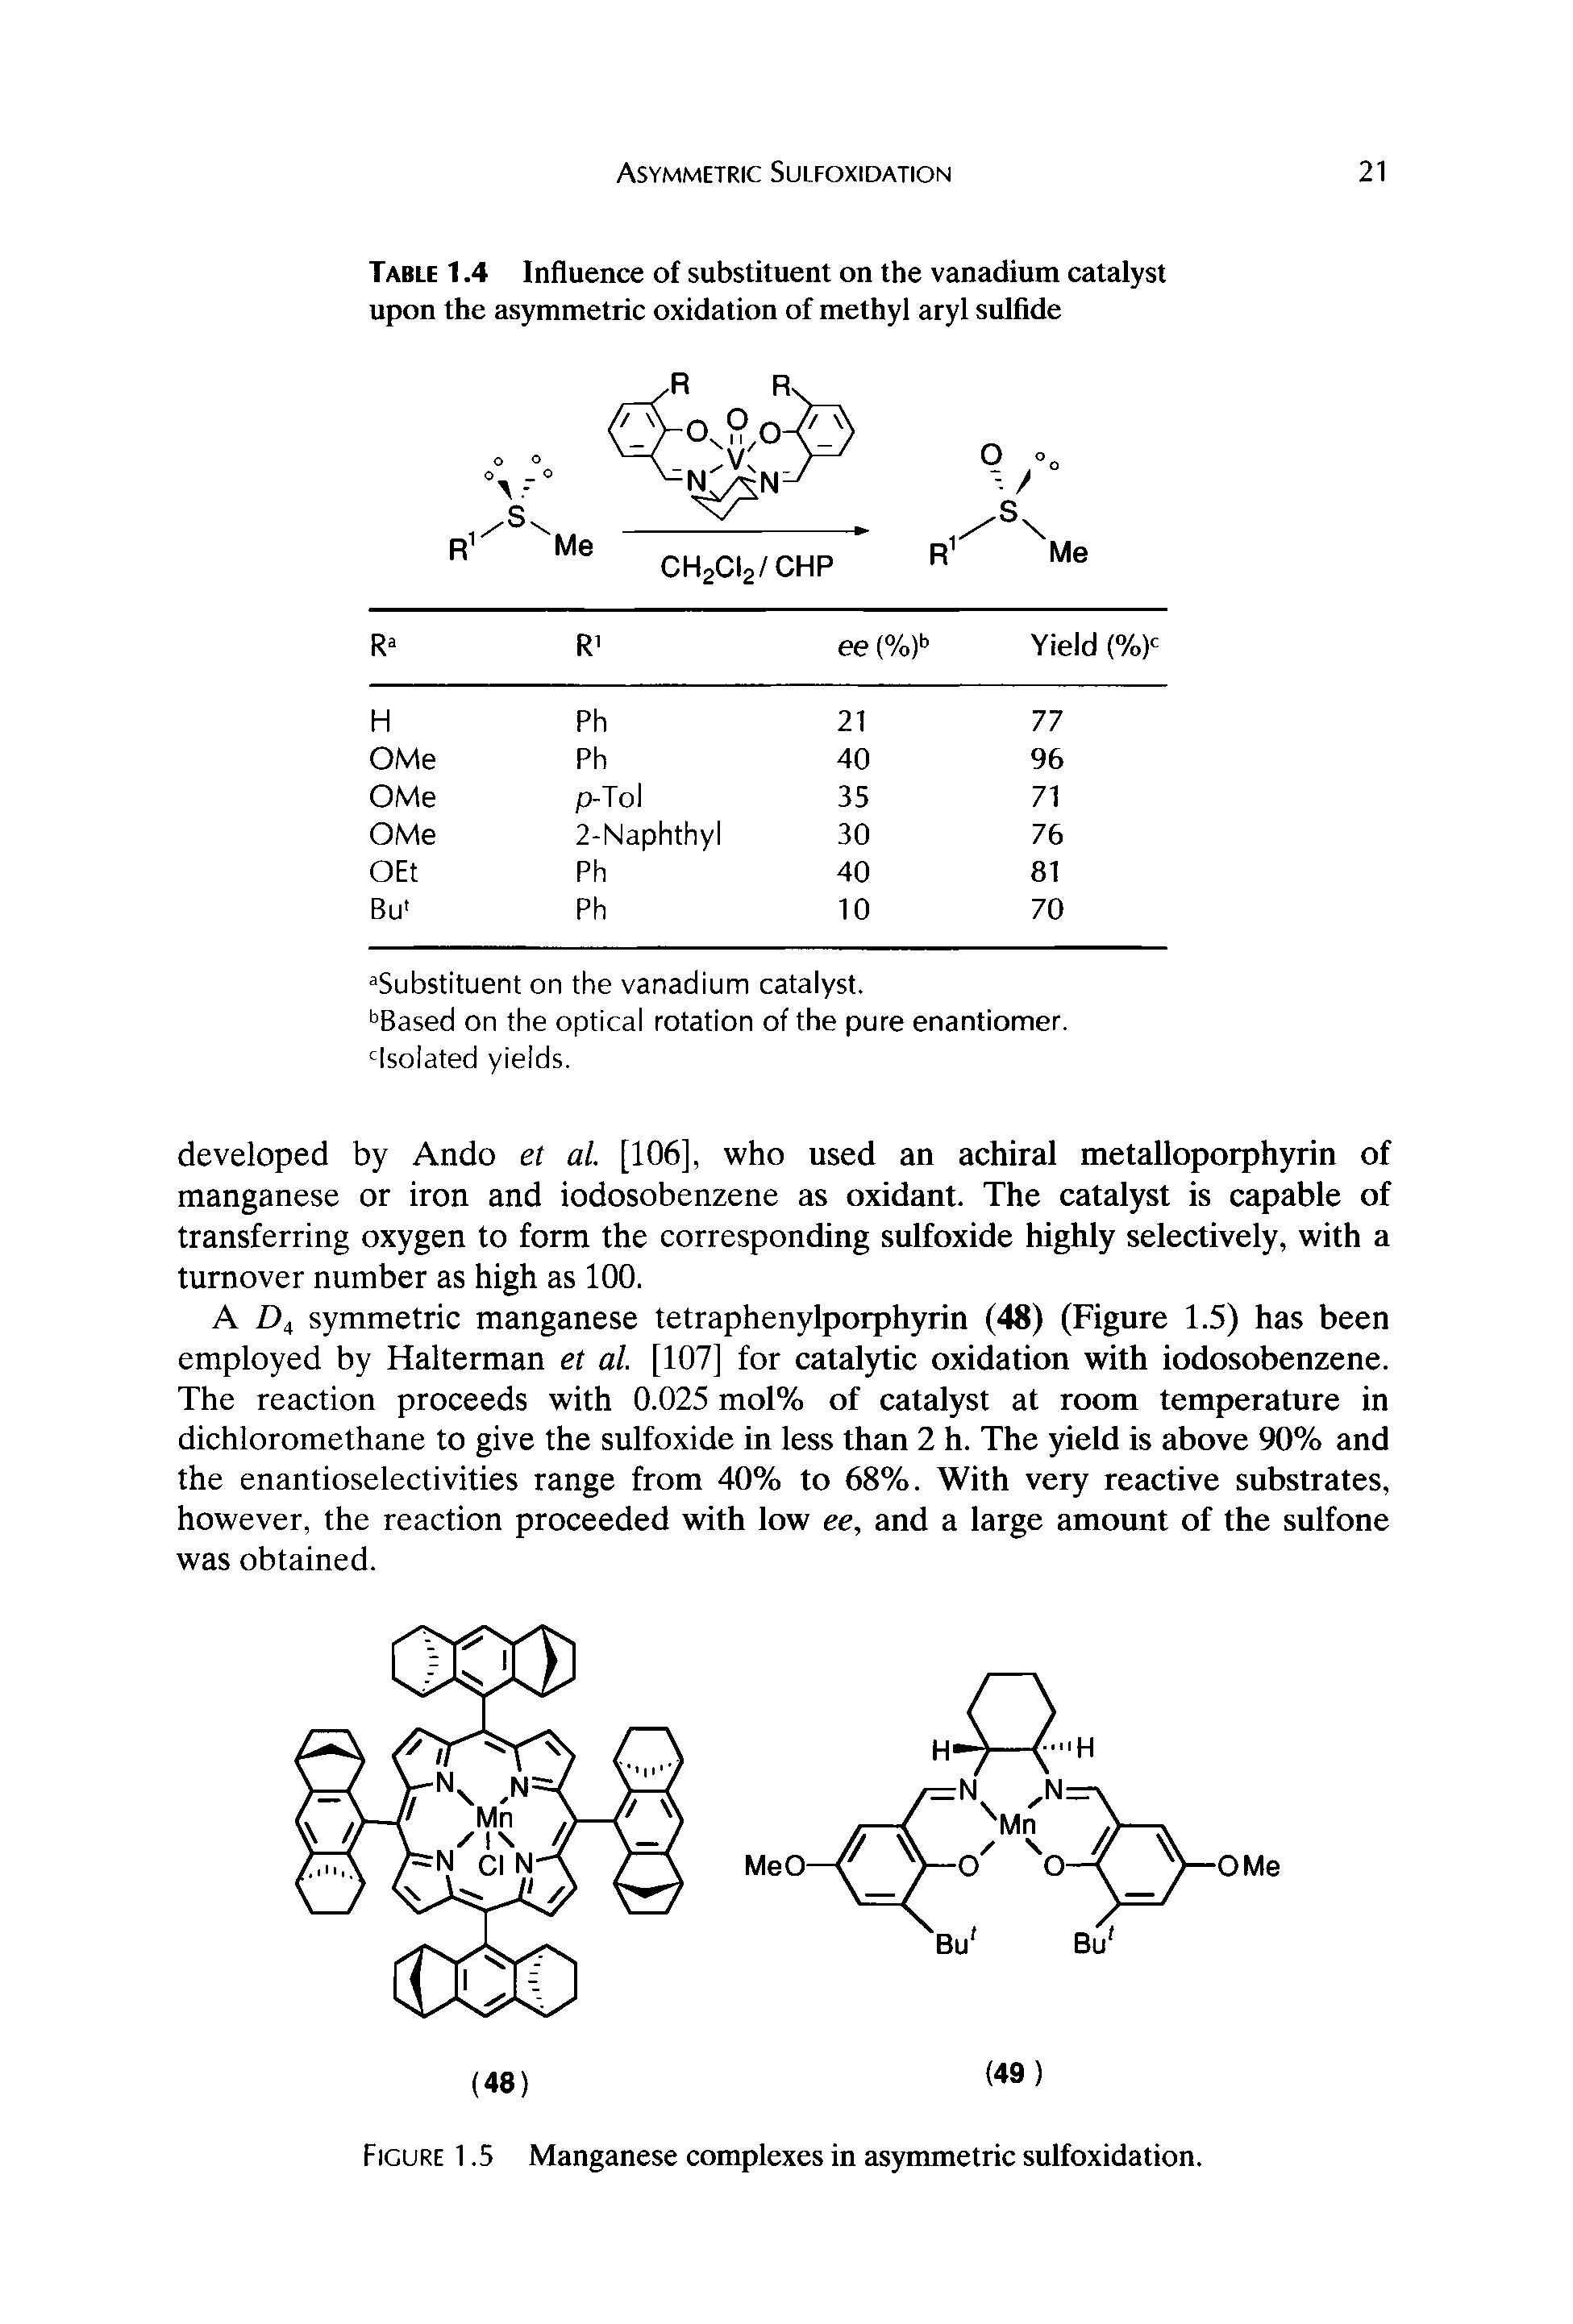 Table 1.4 Influence of substituent on the vanadium catalyst upon the asymmetric oxidation of methyl aryl sulfide...